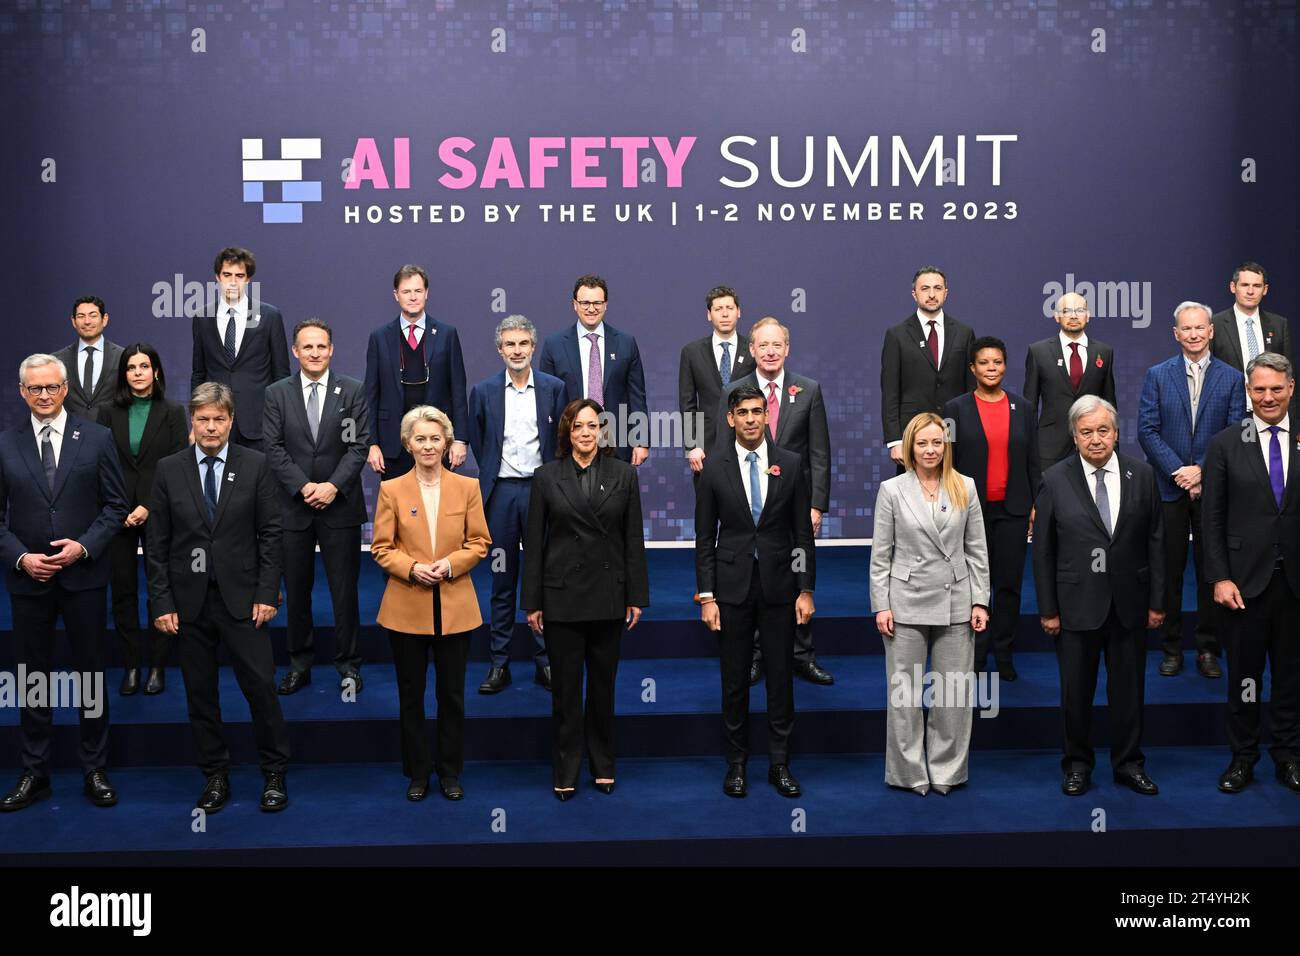 (First row, left to right) France's Minister for Economy, Finance, Industry and Digital Security Bruno Le Maire, German Economy and Climate Minister Robert Habeck, European Commission President Ursula von der Leyen, U.S. Vice President Kamala Harris, Prime Minister Rishi Sunak, Italy's Prime Minister Giorgia Meloni, UN Secretary General Antonio Guterres and Australia's Deputy Prime Minister and Minister of Defence Richard Marles pose for a group photograph on the second day of the AI safety summit, the first global summit on the safe use of artificial intelligence, at Bletchley Park in Milton  Stock Photo